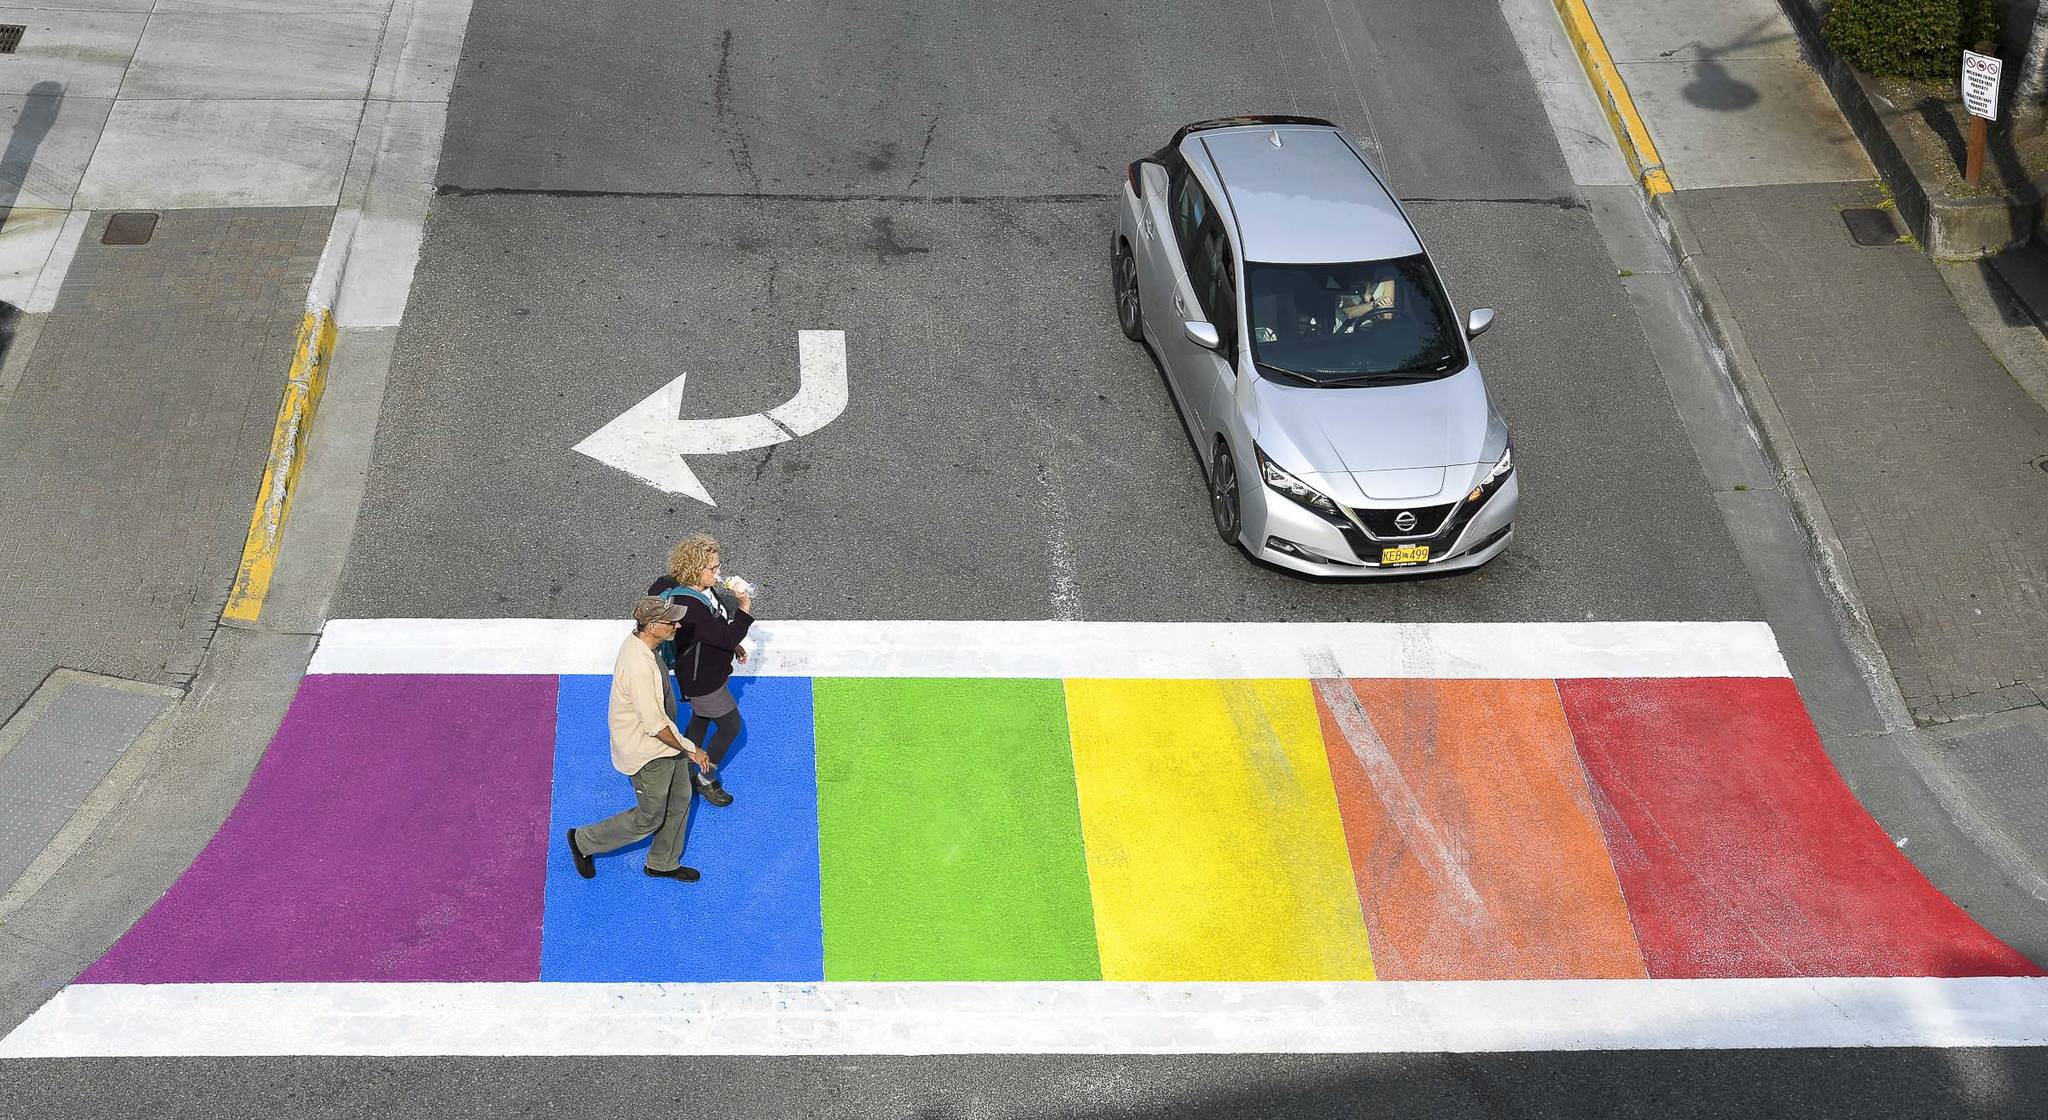 Pedestrians cross Front Street at Main after the city finished painting the crosswalk in rainbow colors on Friday, Aug. 2, 2019. (Michael Penn | Juneau Empire)